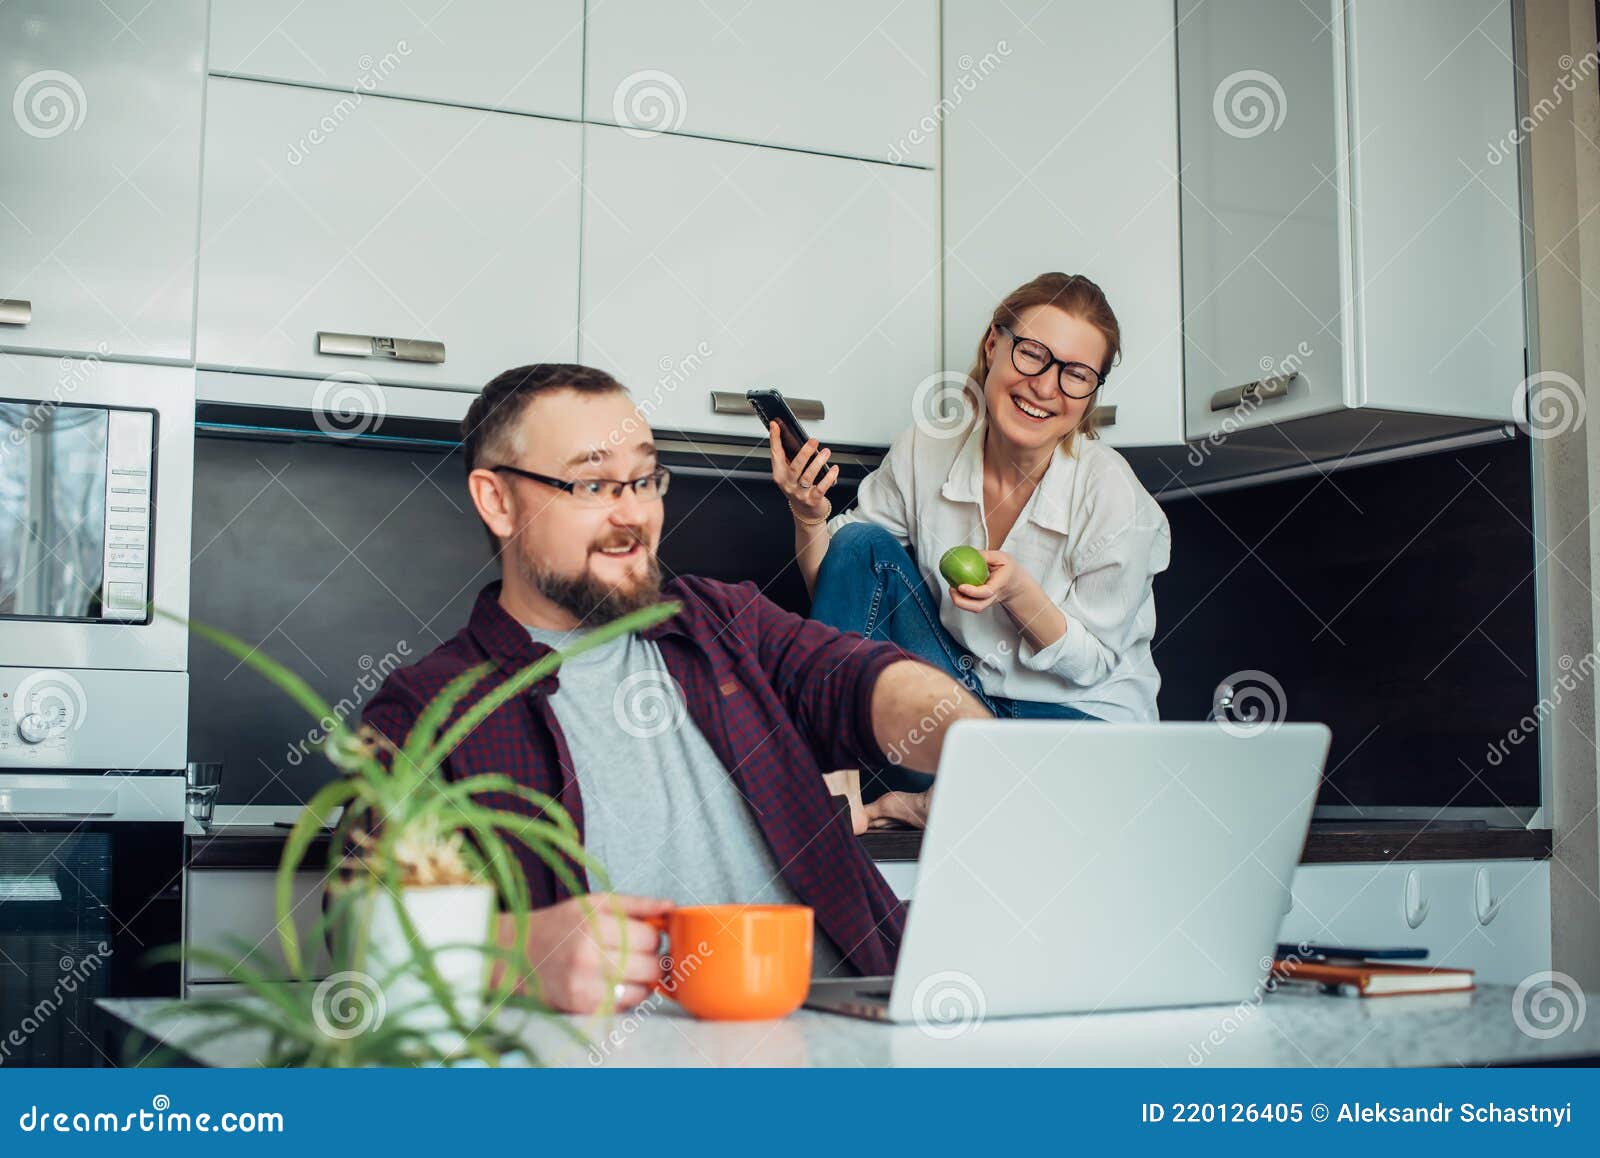 https://thumbs.dreamstime.com/z/happy-forty-year-old-married-couple-spending-time-together-home-kitchen-man-looks-laptop-points-monitor-220126405.jpg